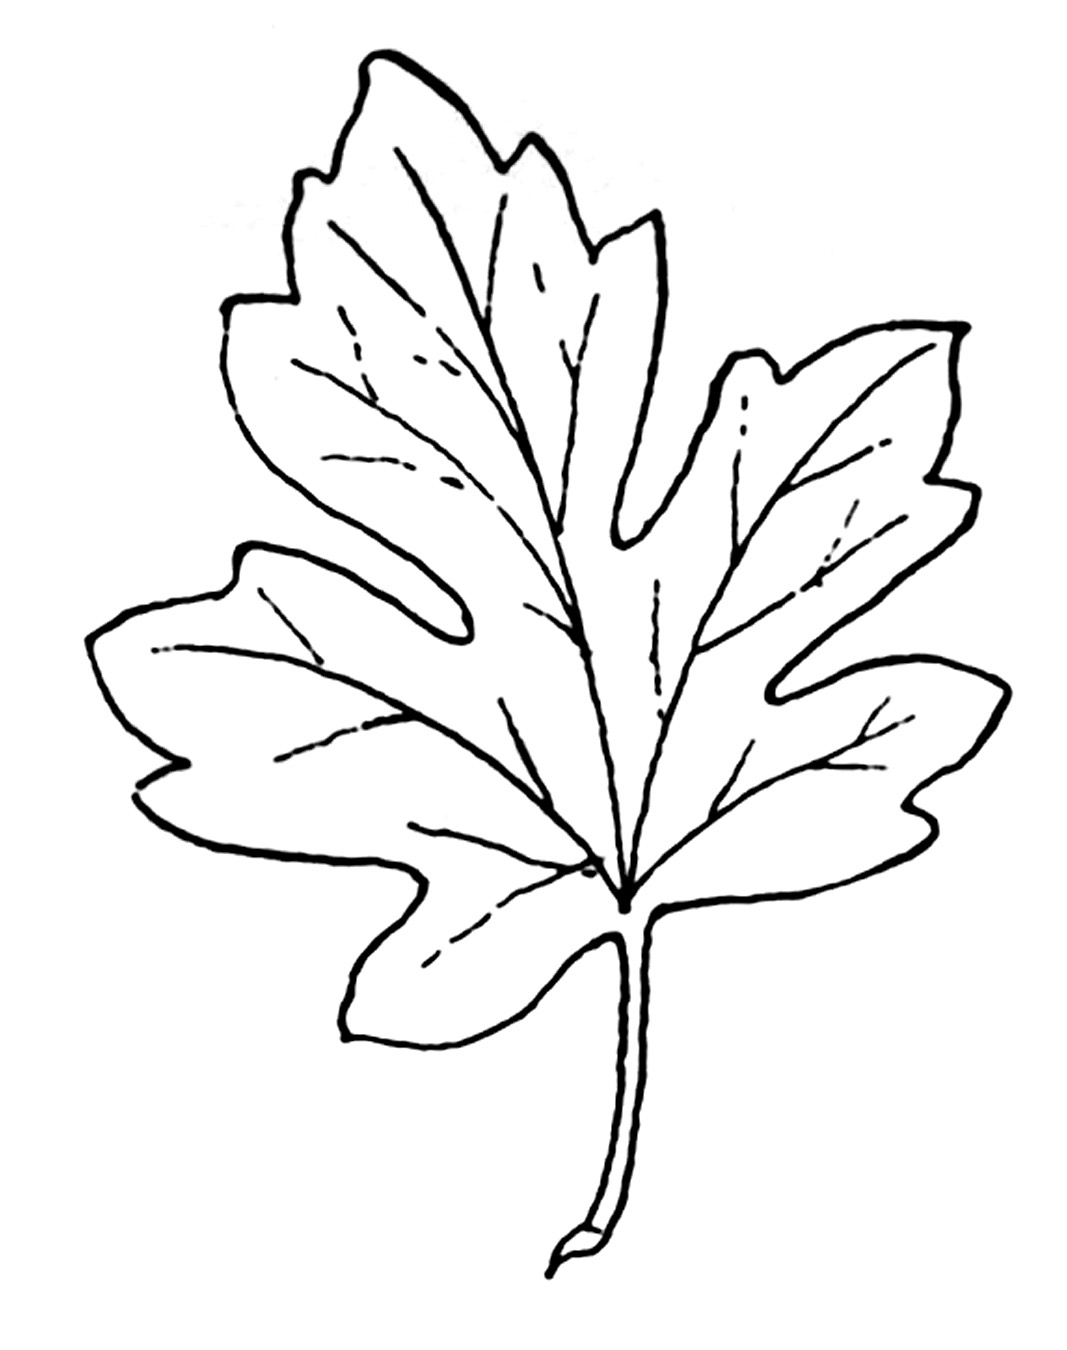 Fall black and white leaves clipart black and white